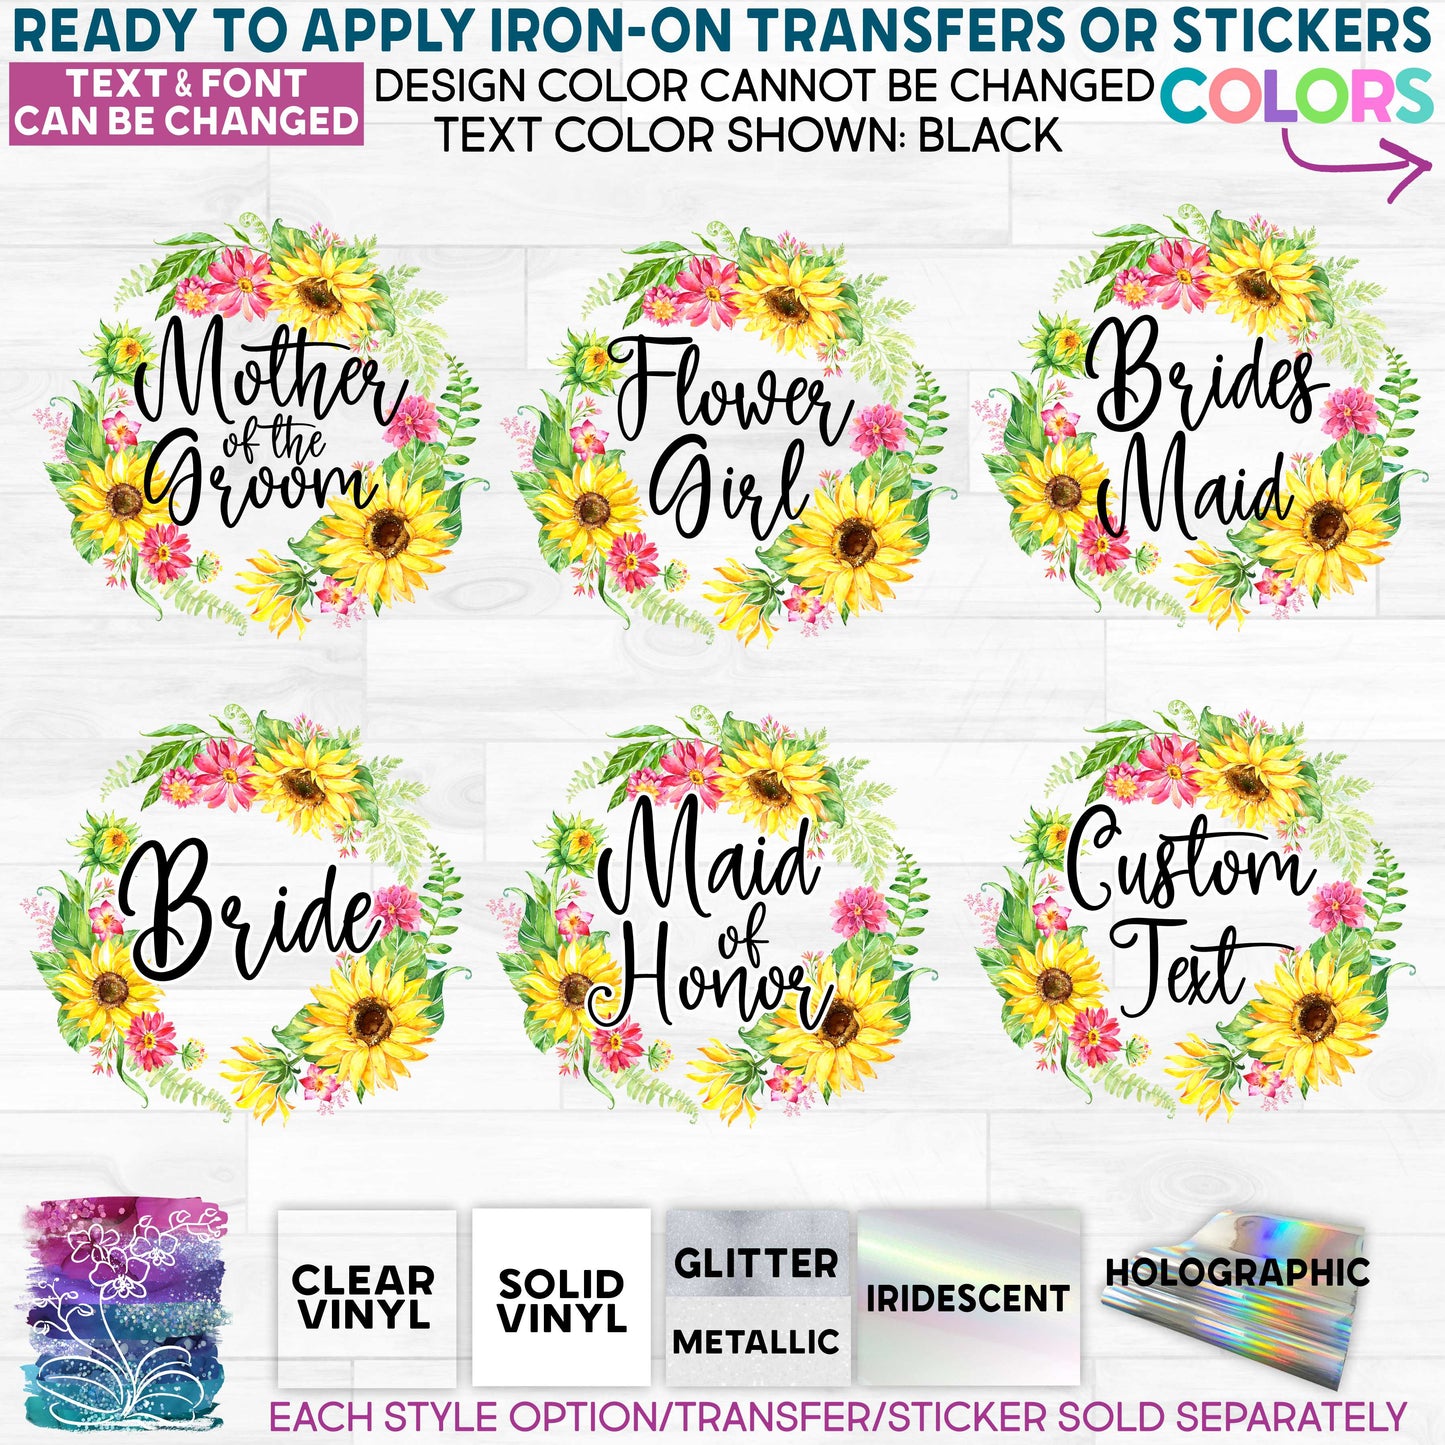 SBS-45-A Bride Bridesmaid Flower Girl Petal Patrol Maid of Honor Sunflower Floral Flowers Watercolor  Made-to-Order Iron-On Transfer or Sticker